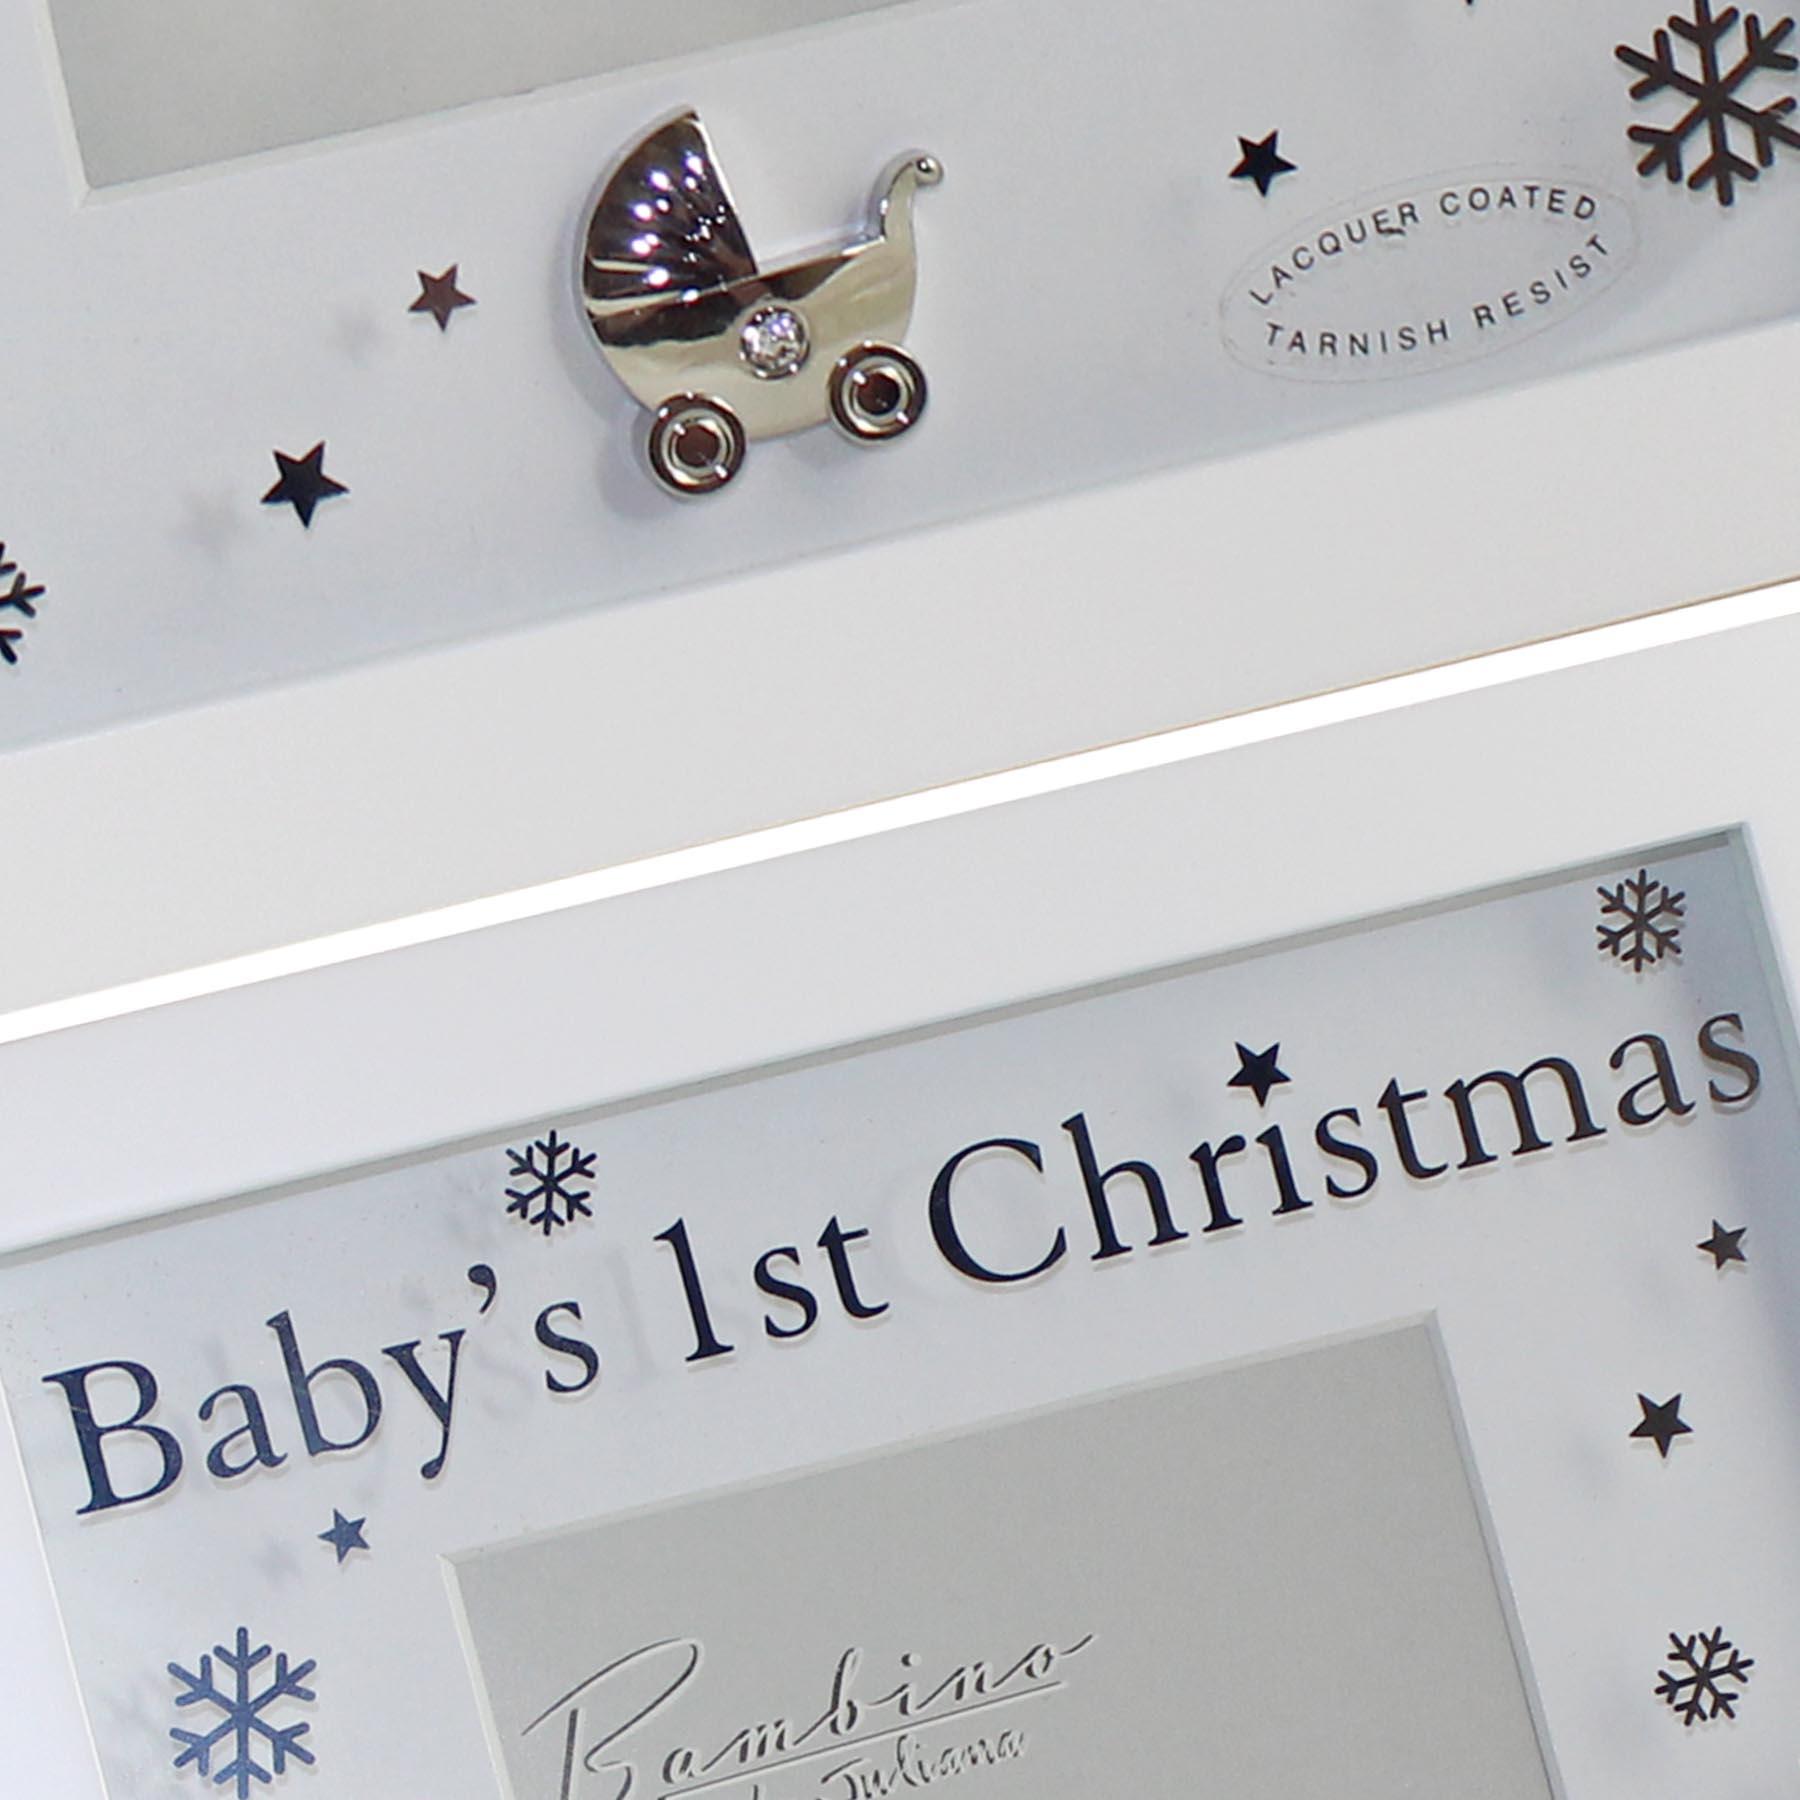 Bambino Baby's 1st Christmas 4x6 Photo Frame - White and Silver